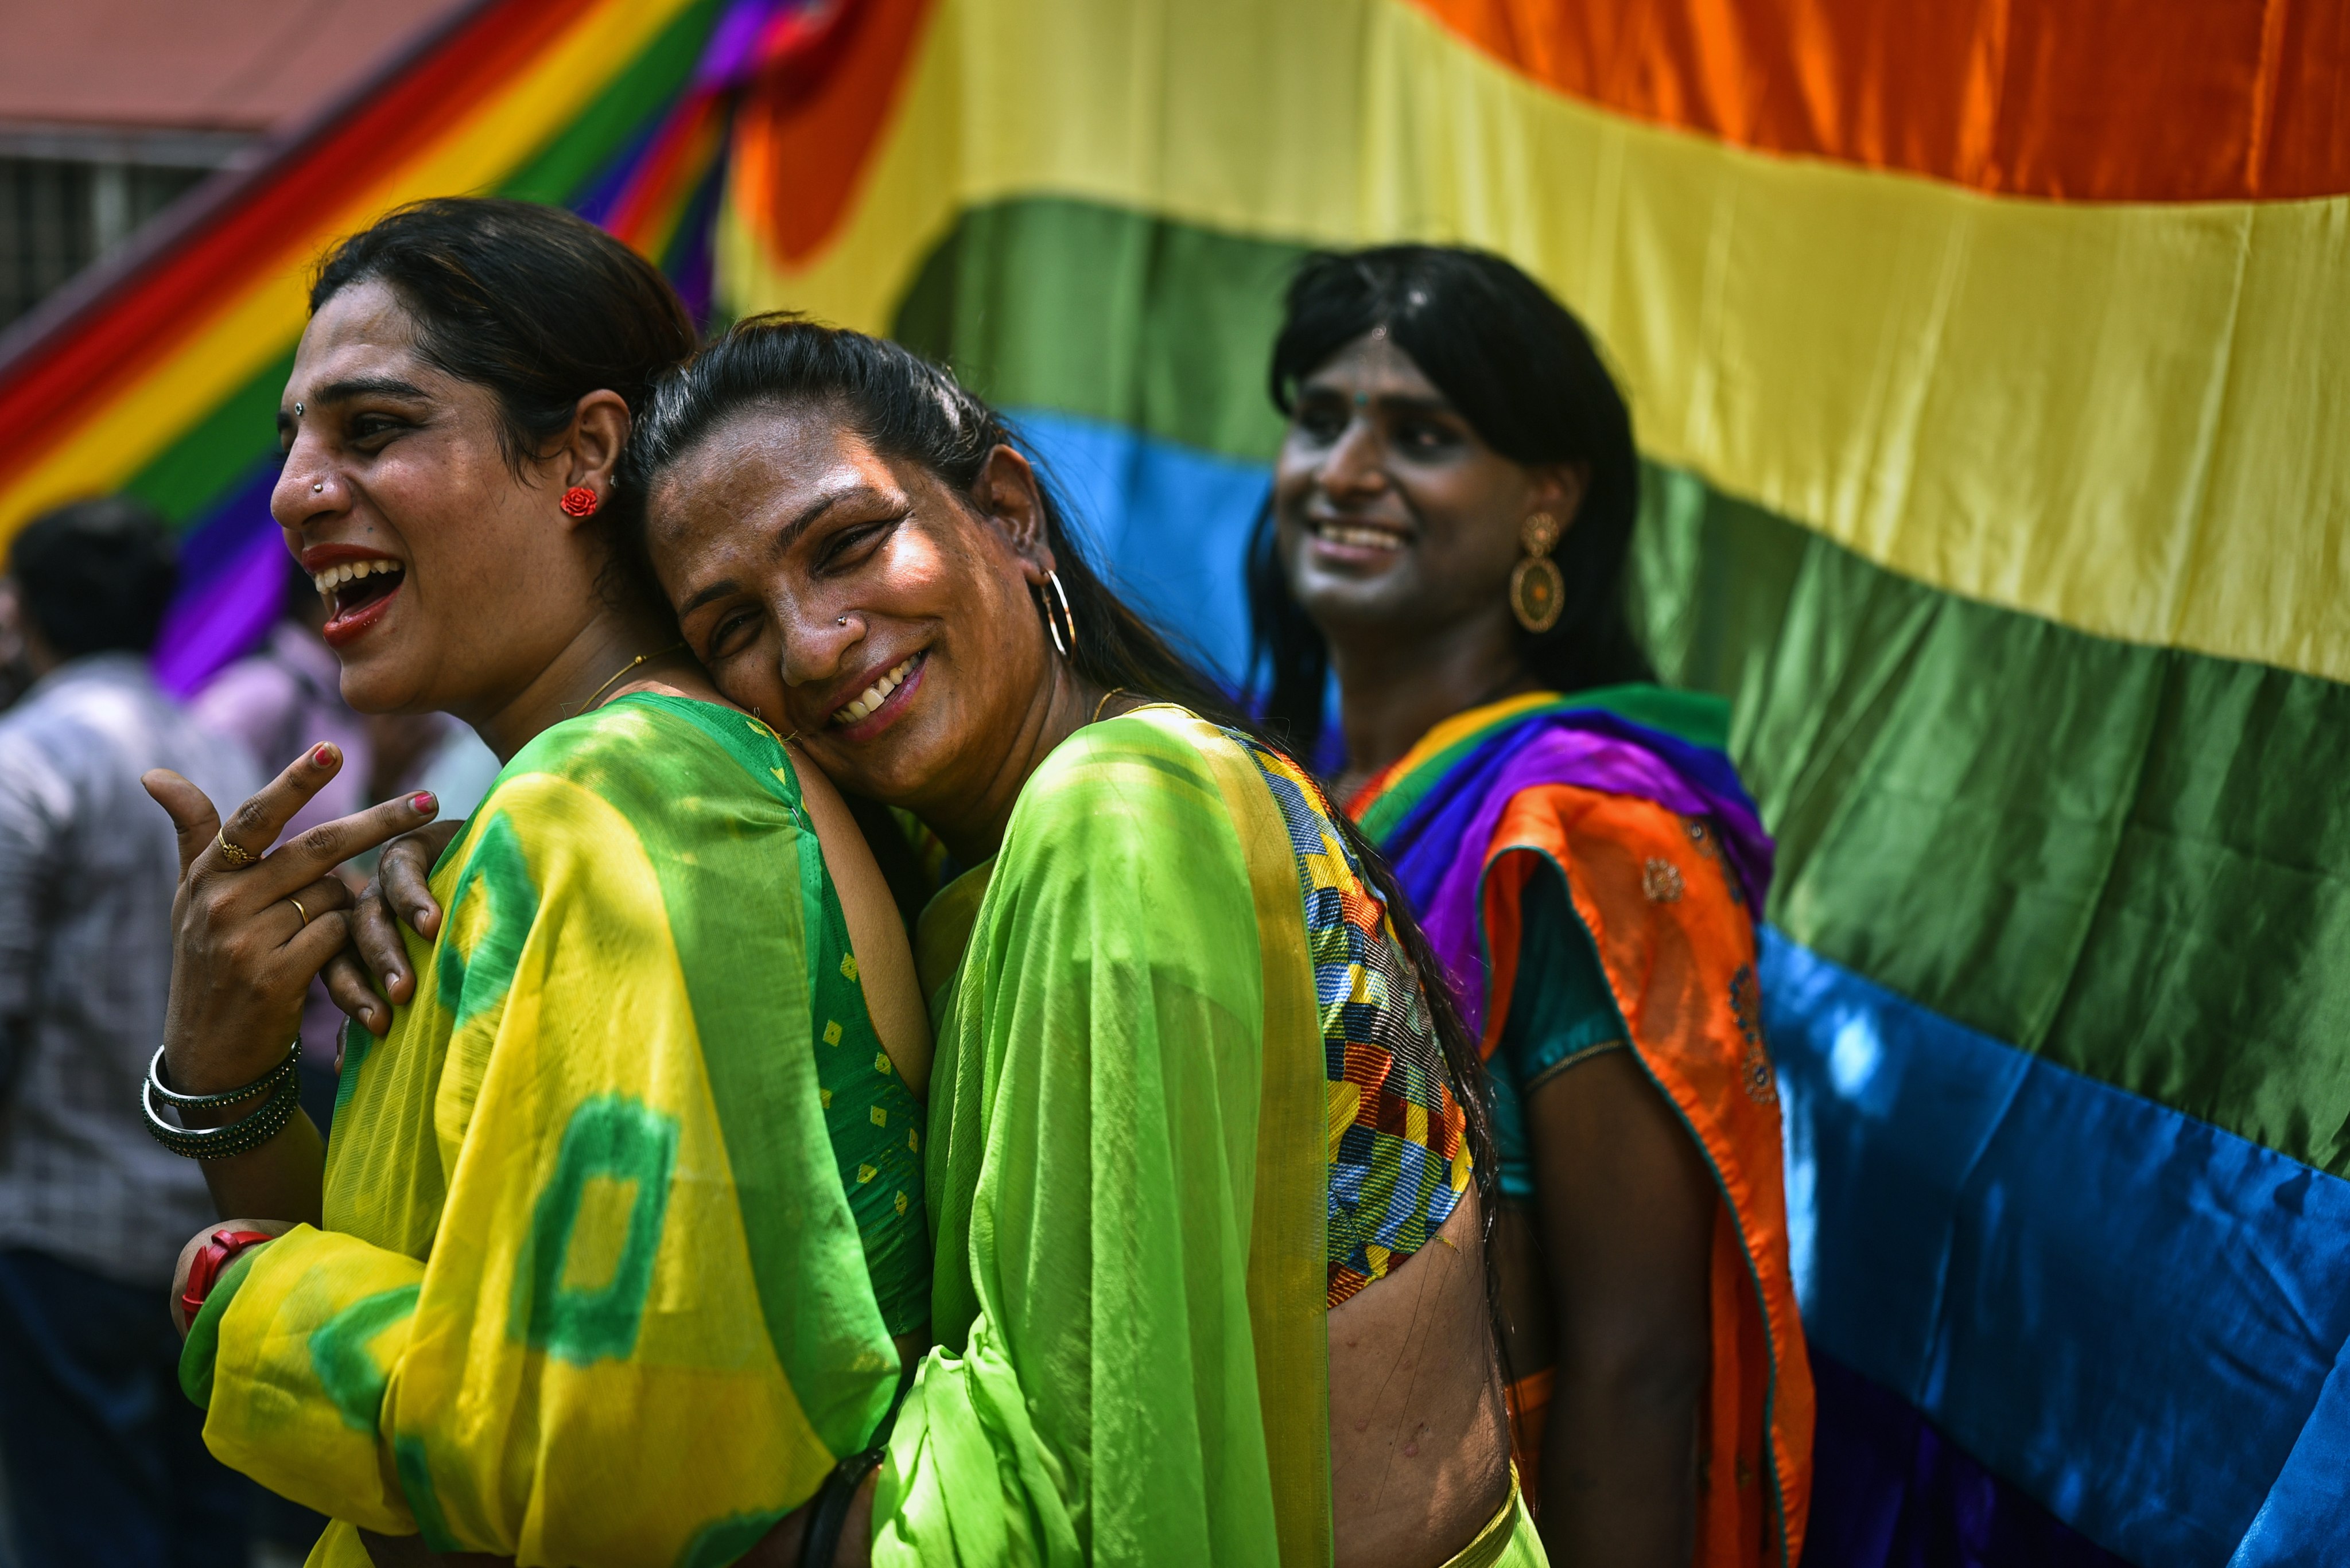 Members and supporters of the LGBTQ community celebrate the opening ceremony of rainbow pride month in Chennai, India. Photo: EPA-EFE